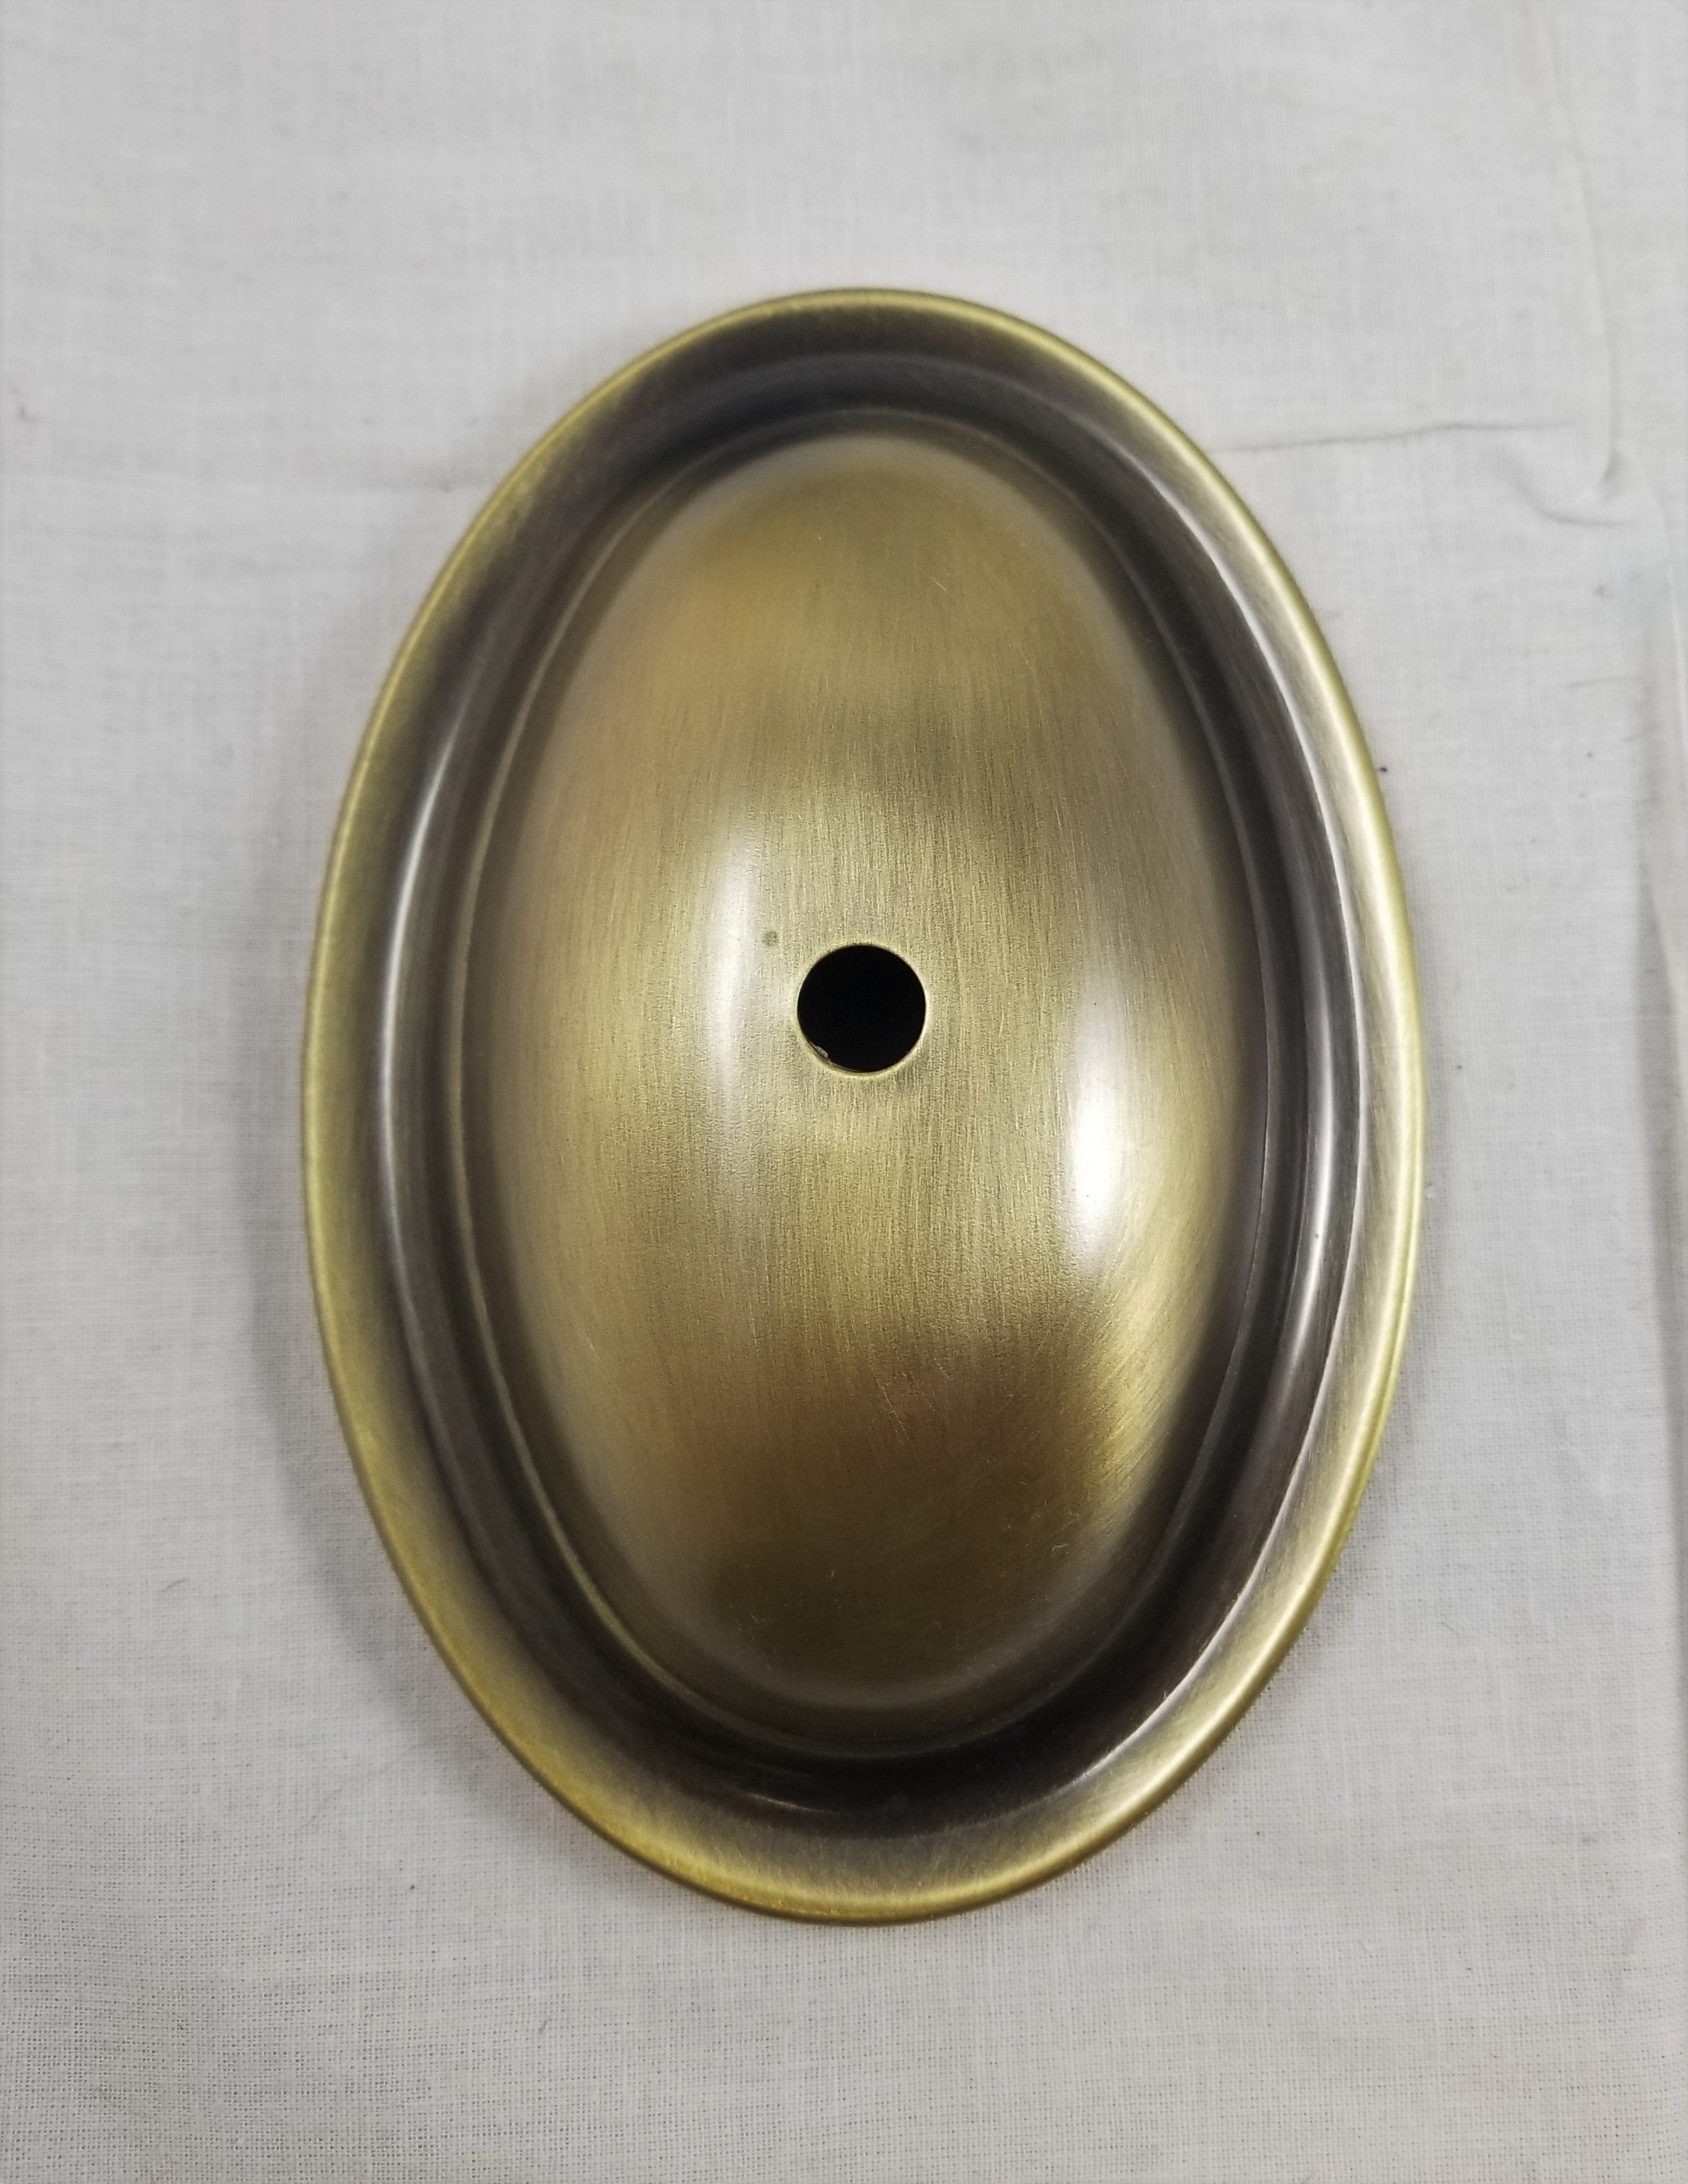 Brass Finish 6" Tall Back Plate for Sconce.